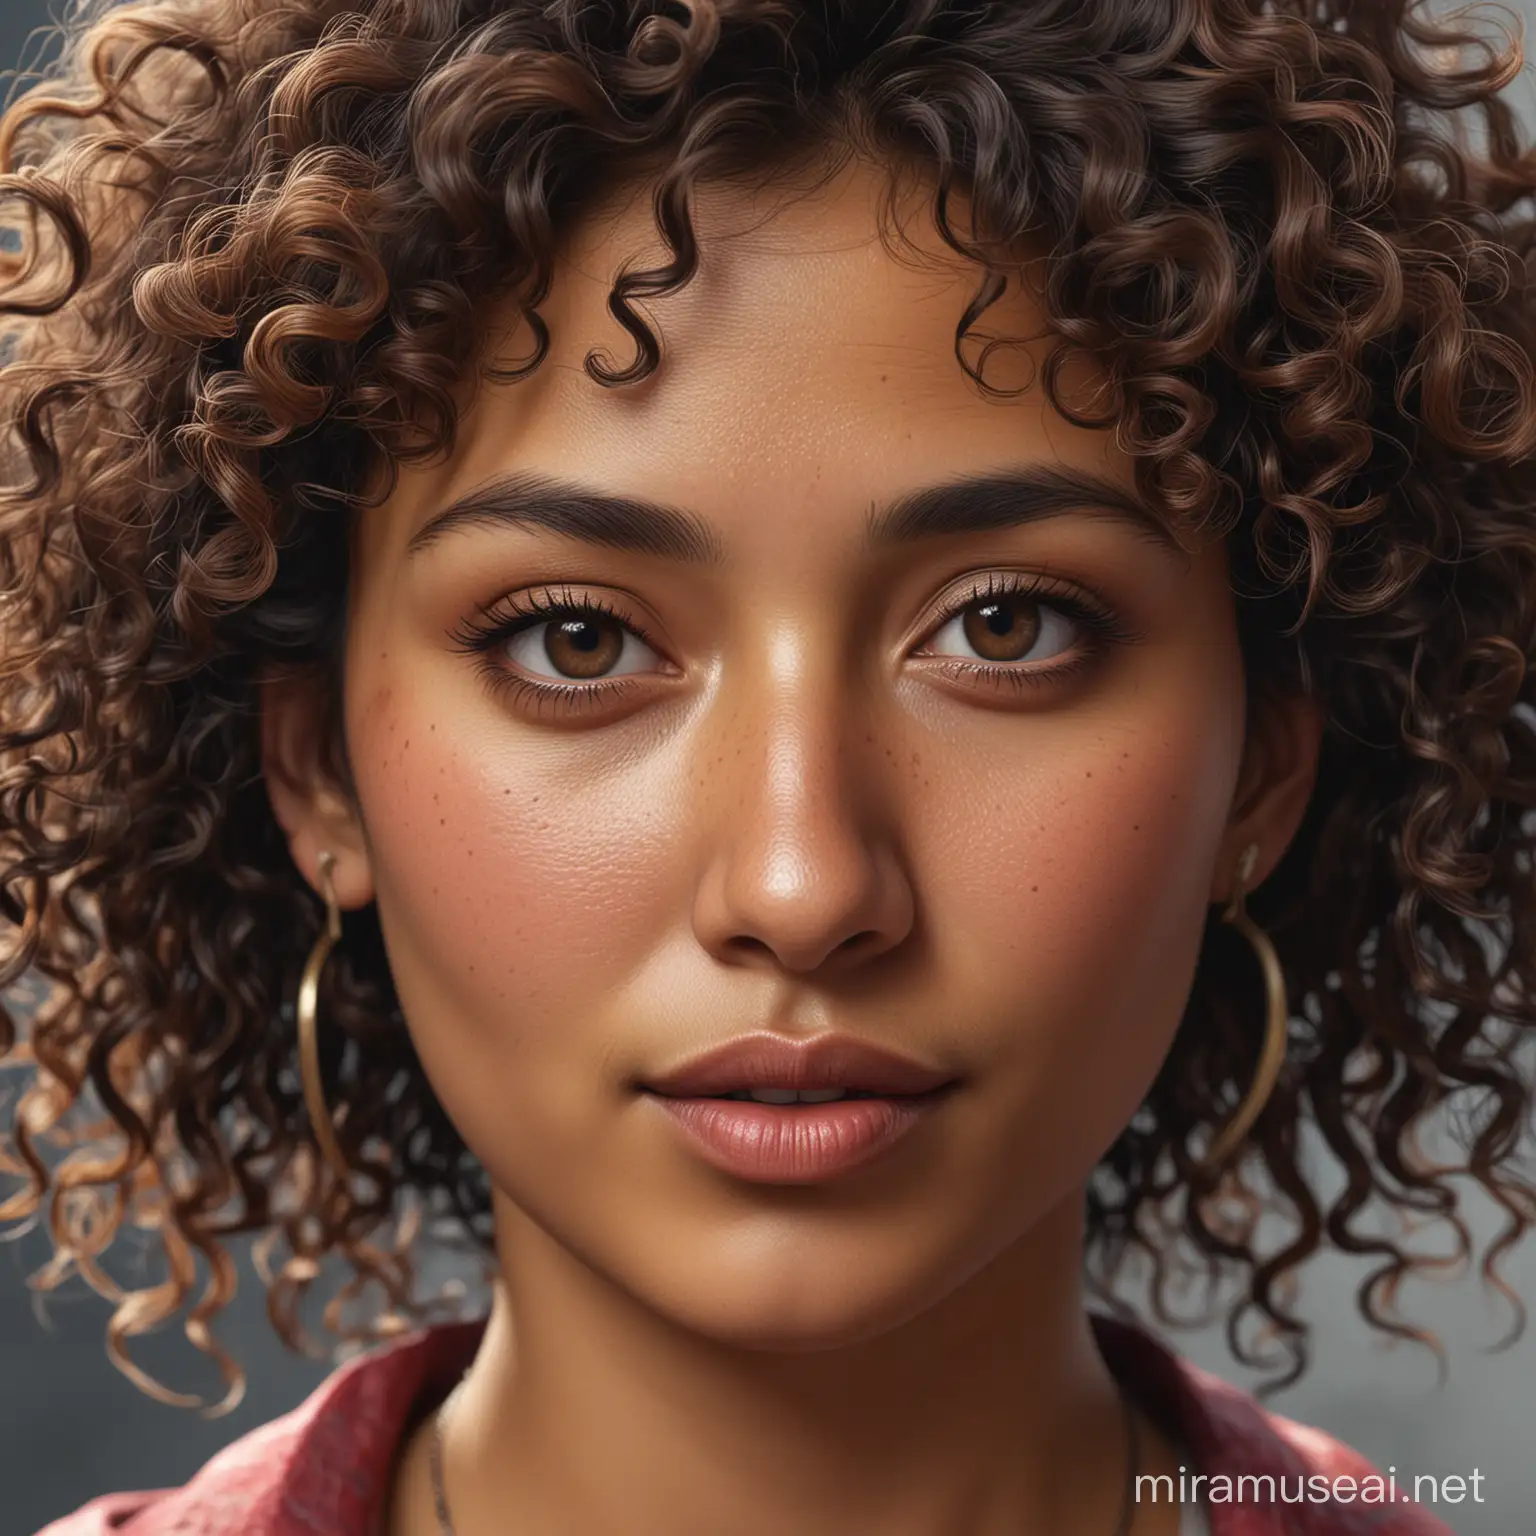 CloseUp Portrait of Nepali Woman with Button Nose and Curly Hair